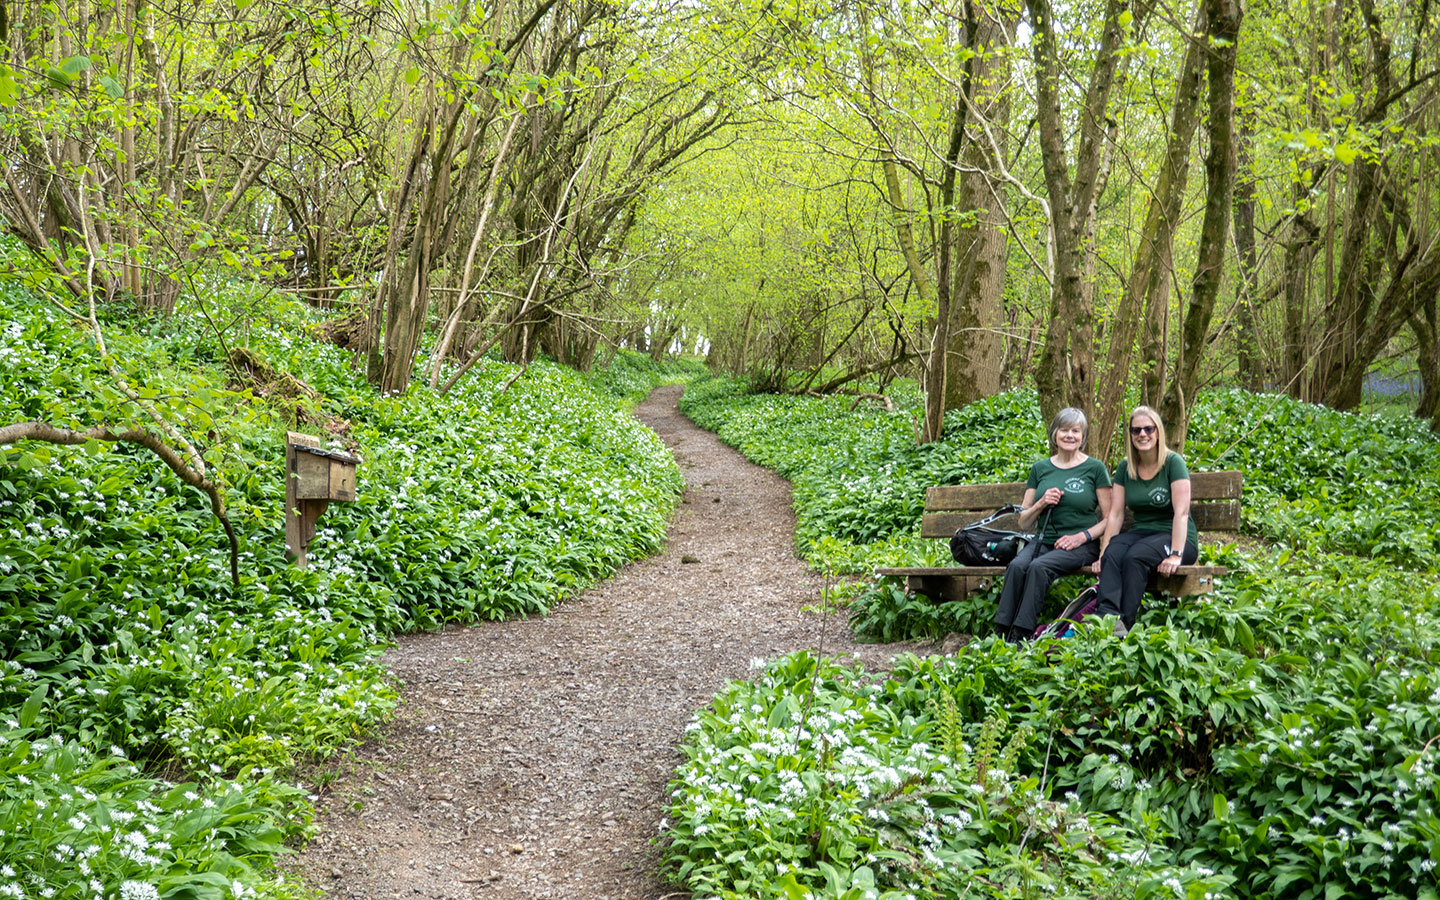 Wild garlic in Dyrham Woods in the Cotswolds in March